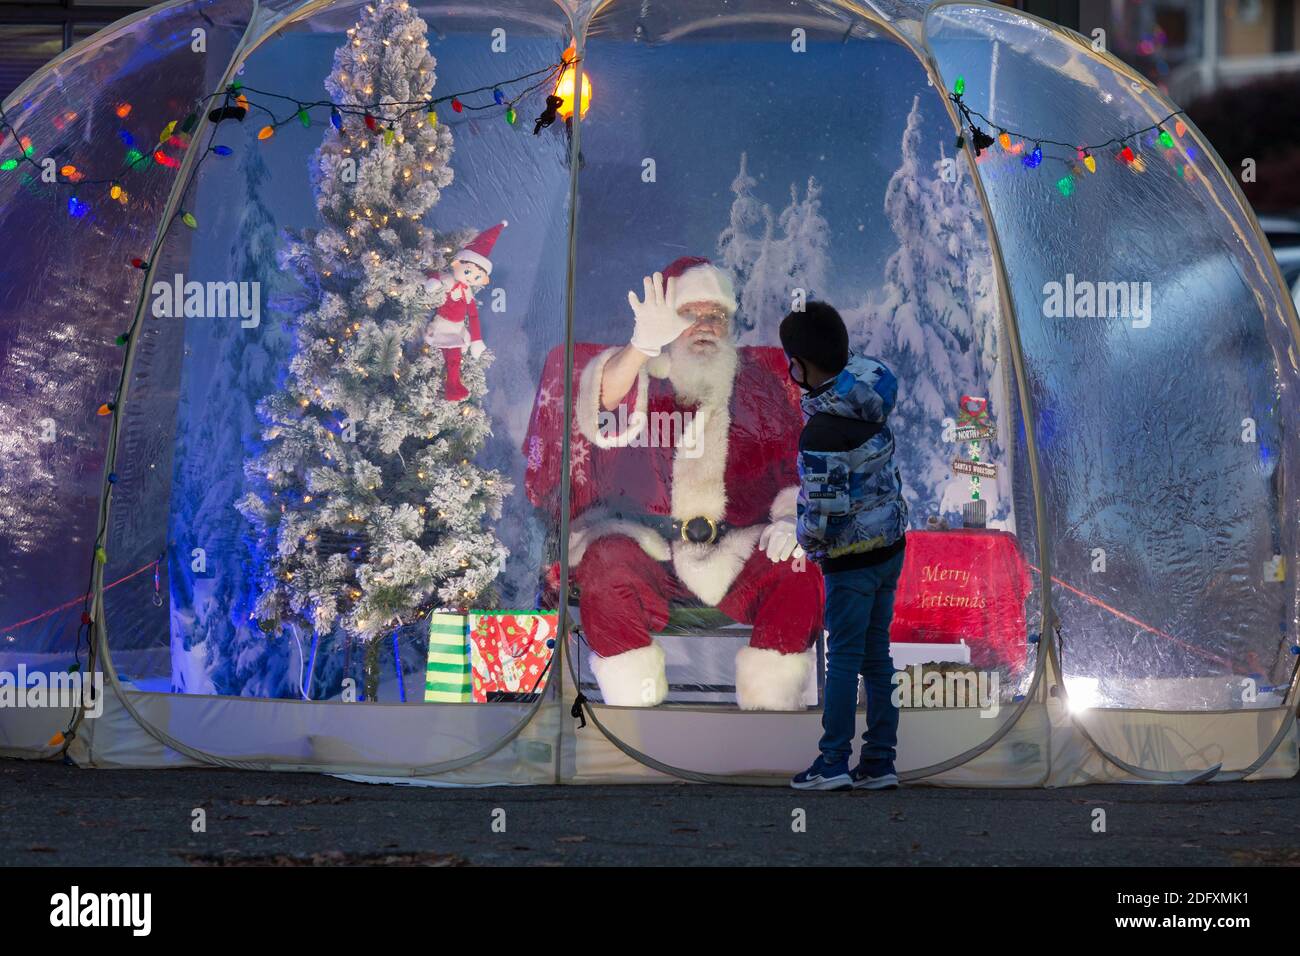 Seattle, Washington, USA. 6th December, 2020. Dan Kemmis, known as the Seattle Santa, high fives a young boy from within a protective plastic bubble in Seattle’s Greenwood neighborhood. Unable to schedule private events due to the coronavirus pandemic, Kemmis is making physically distanced public appearances with some donations benefiting local homeless shelters. Credit: Paul Christian Gordon/Alamy Live News Stock Photo